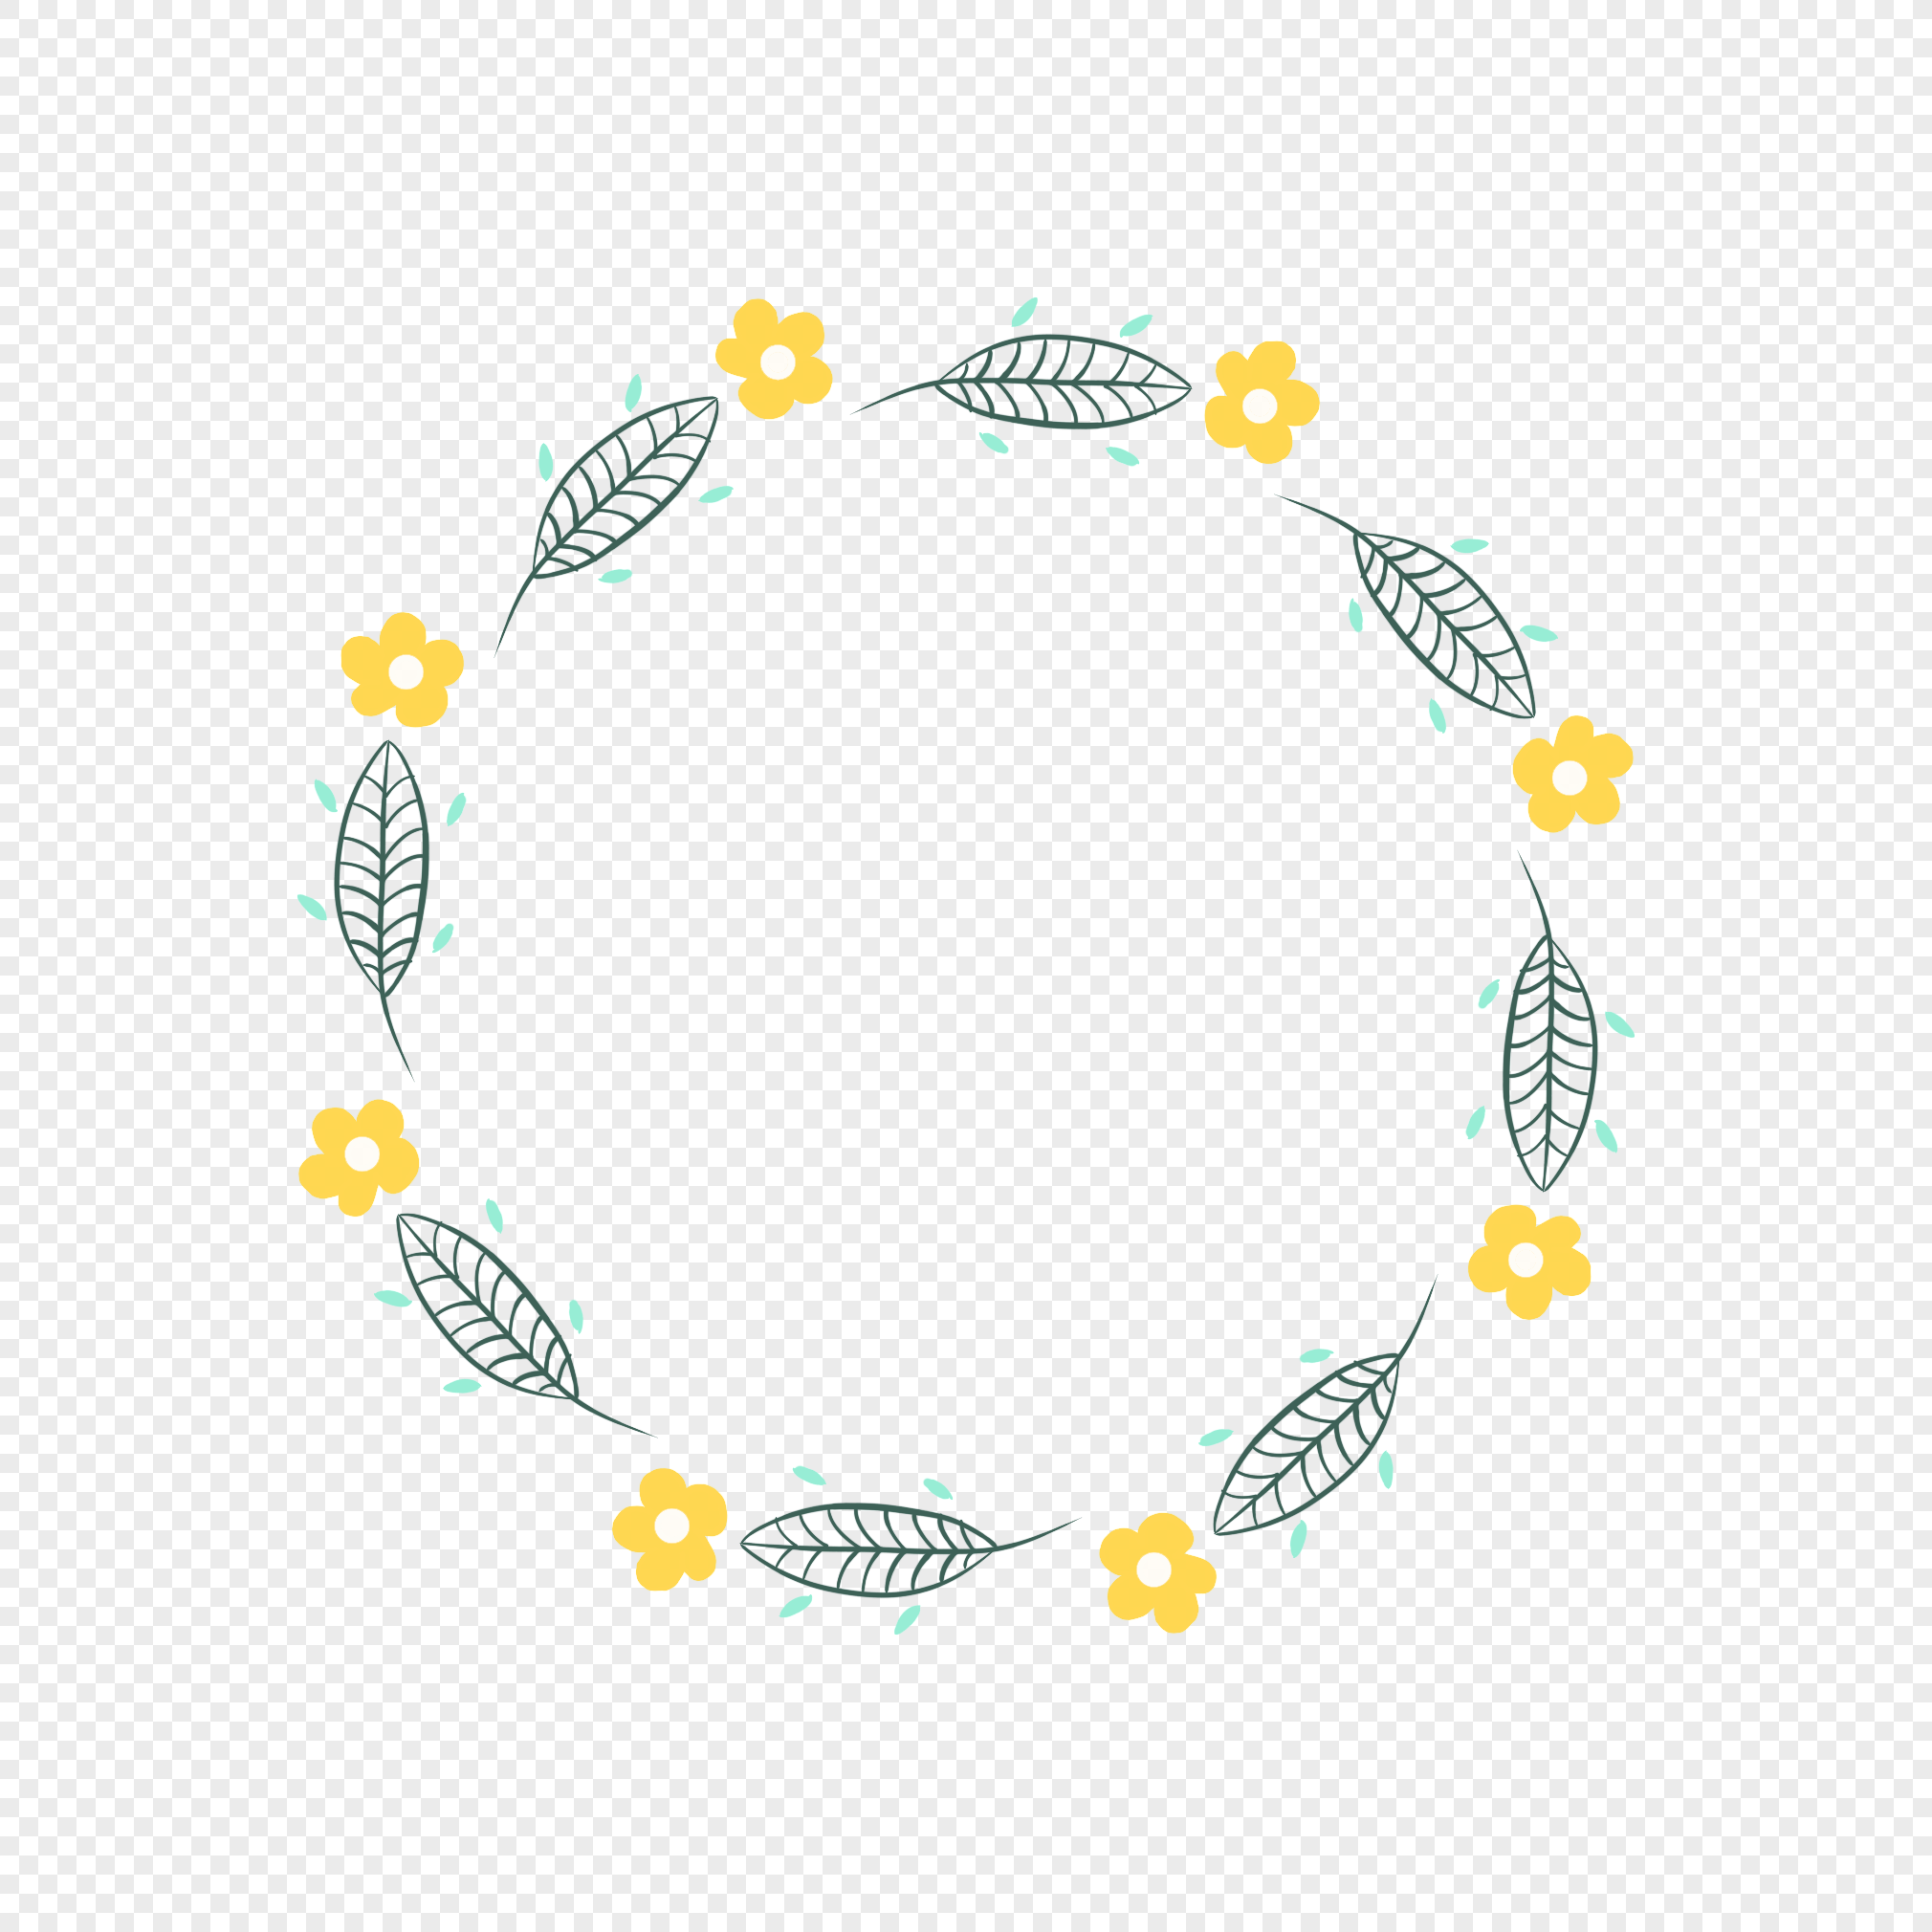 Wreath Border PNG Image And Clipart Image For Free Download - Lovepik ...